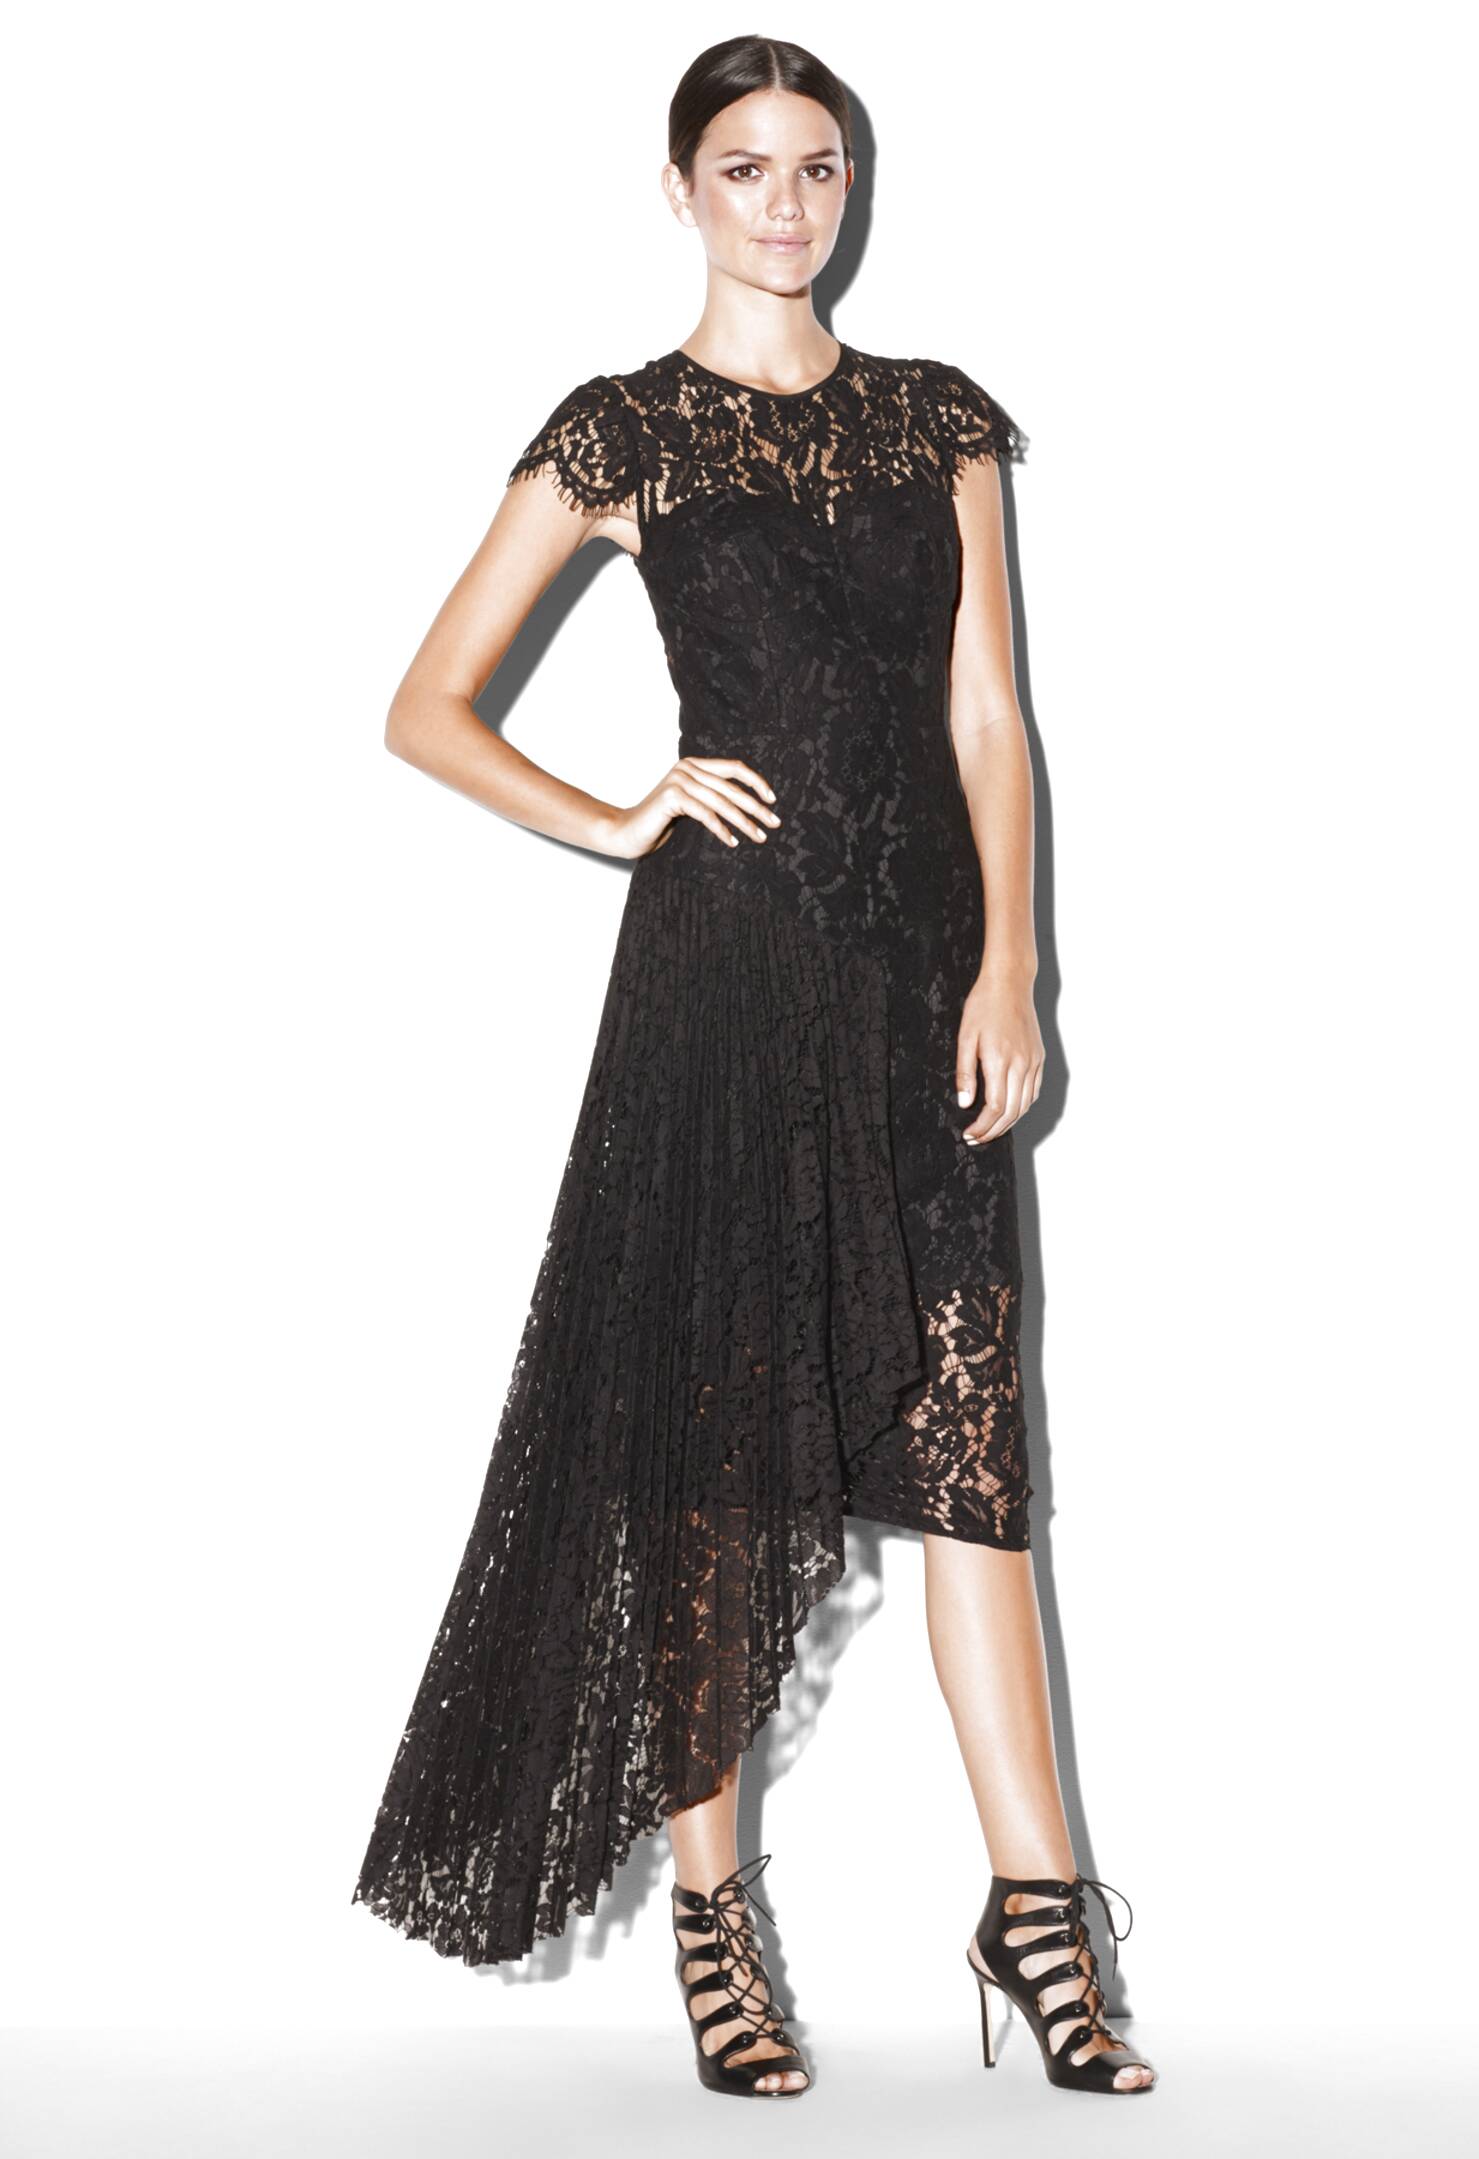 Milly Lace Dress for sale in UK View 16 bargains